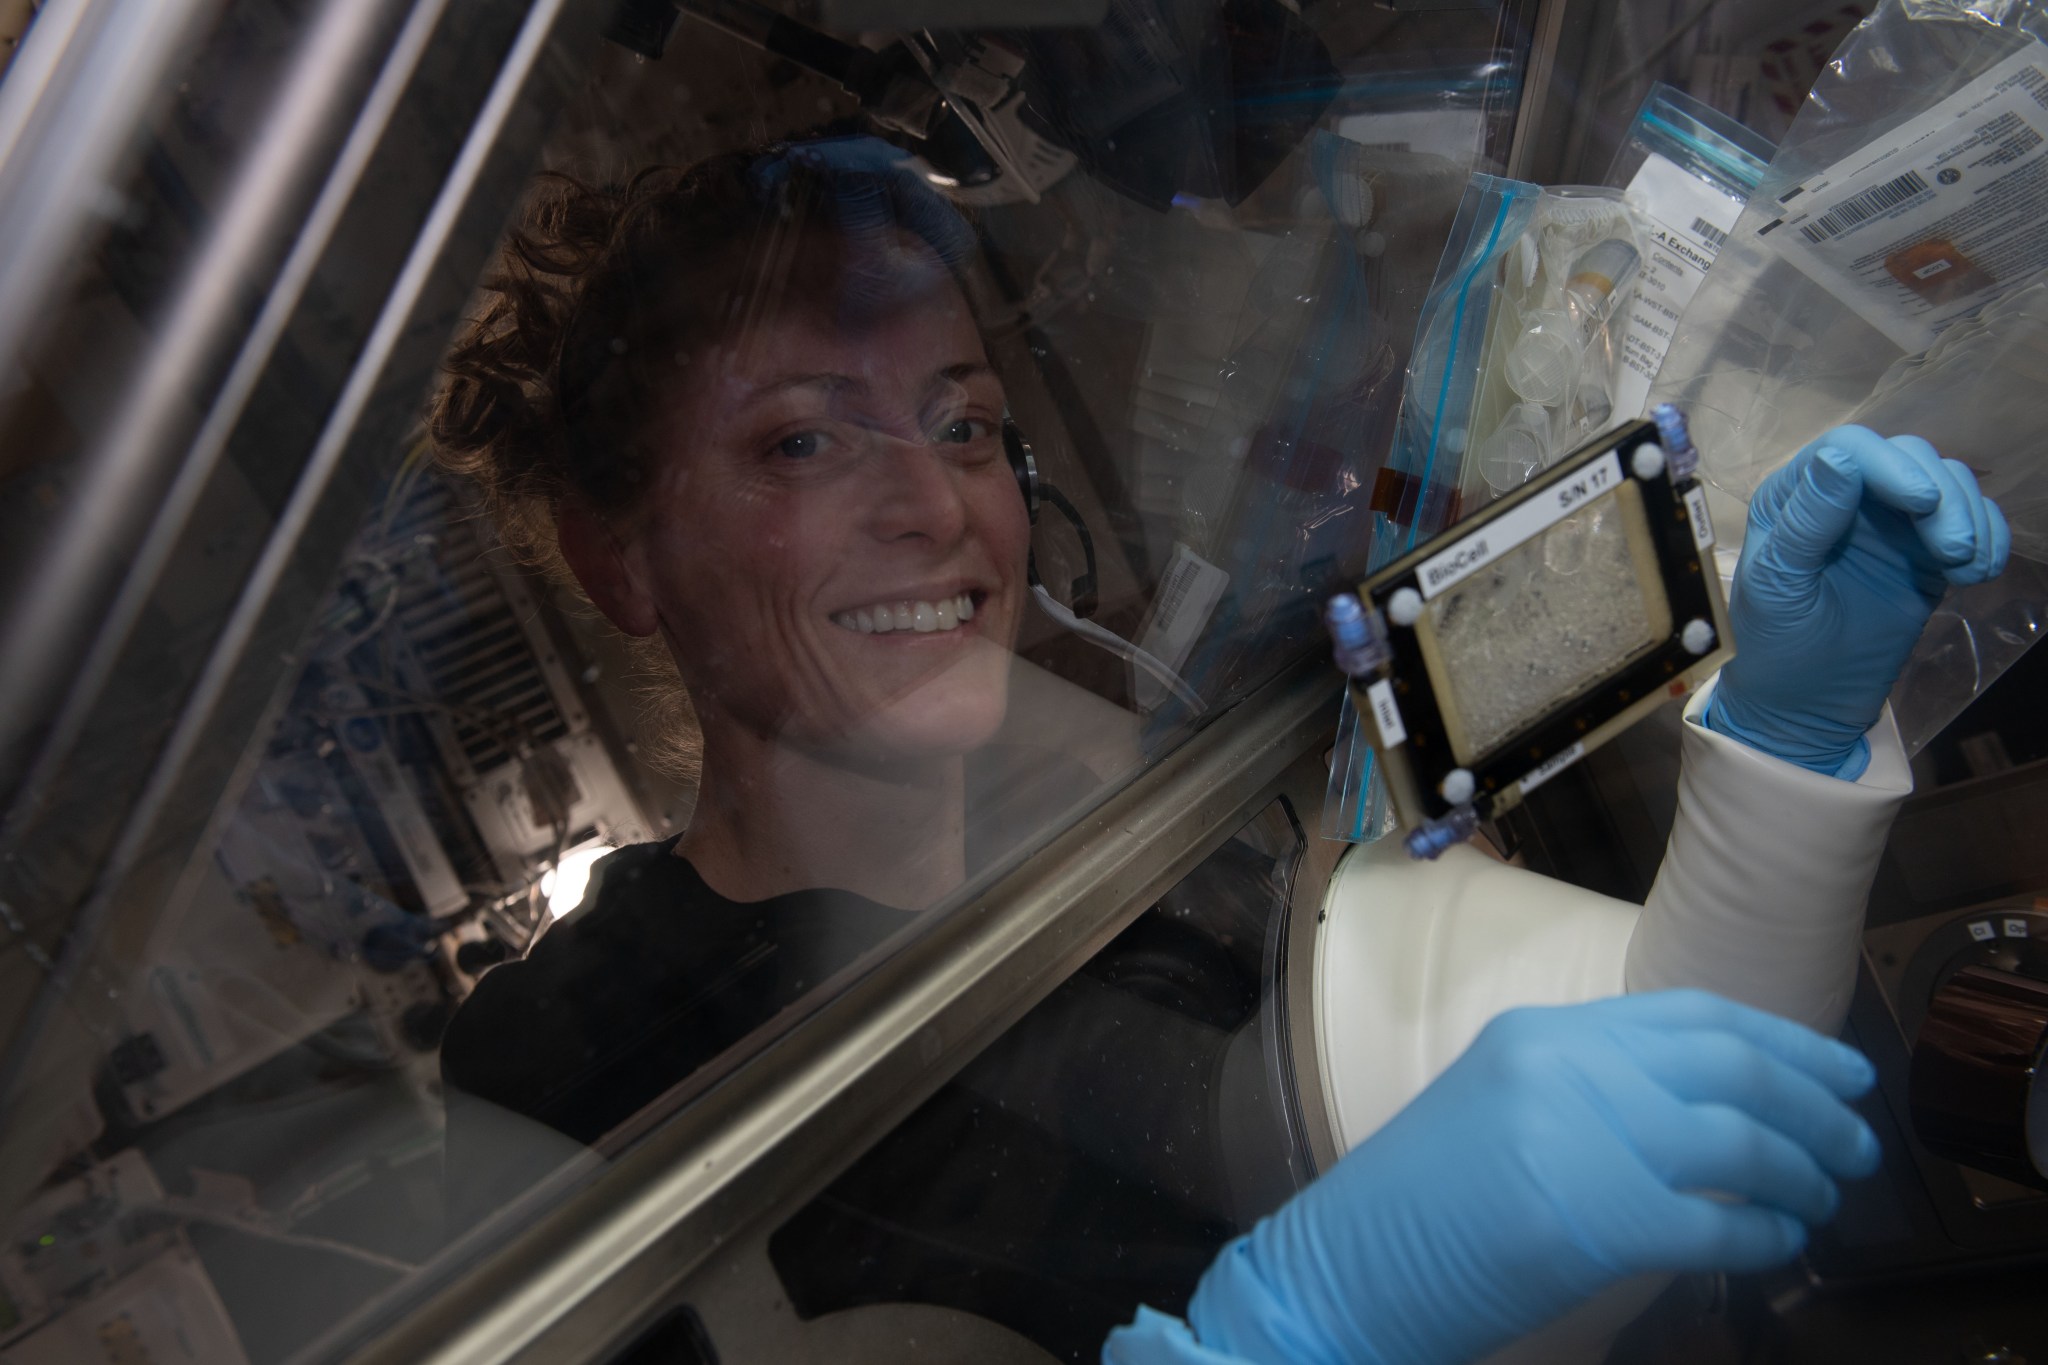 NASA astronaut and Expedition 70 Flight Engineer Loral O'Hara works on a bone cell study inside the Life Science Glovebox located inside the International Space Station's Kibo laboratory module. O'Hara was working on the Microgravity Associated Bone Loss-A investigation that may provide a better understanding of space-caused bone loss and aging-related bone conditions on Earth.